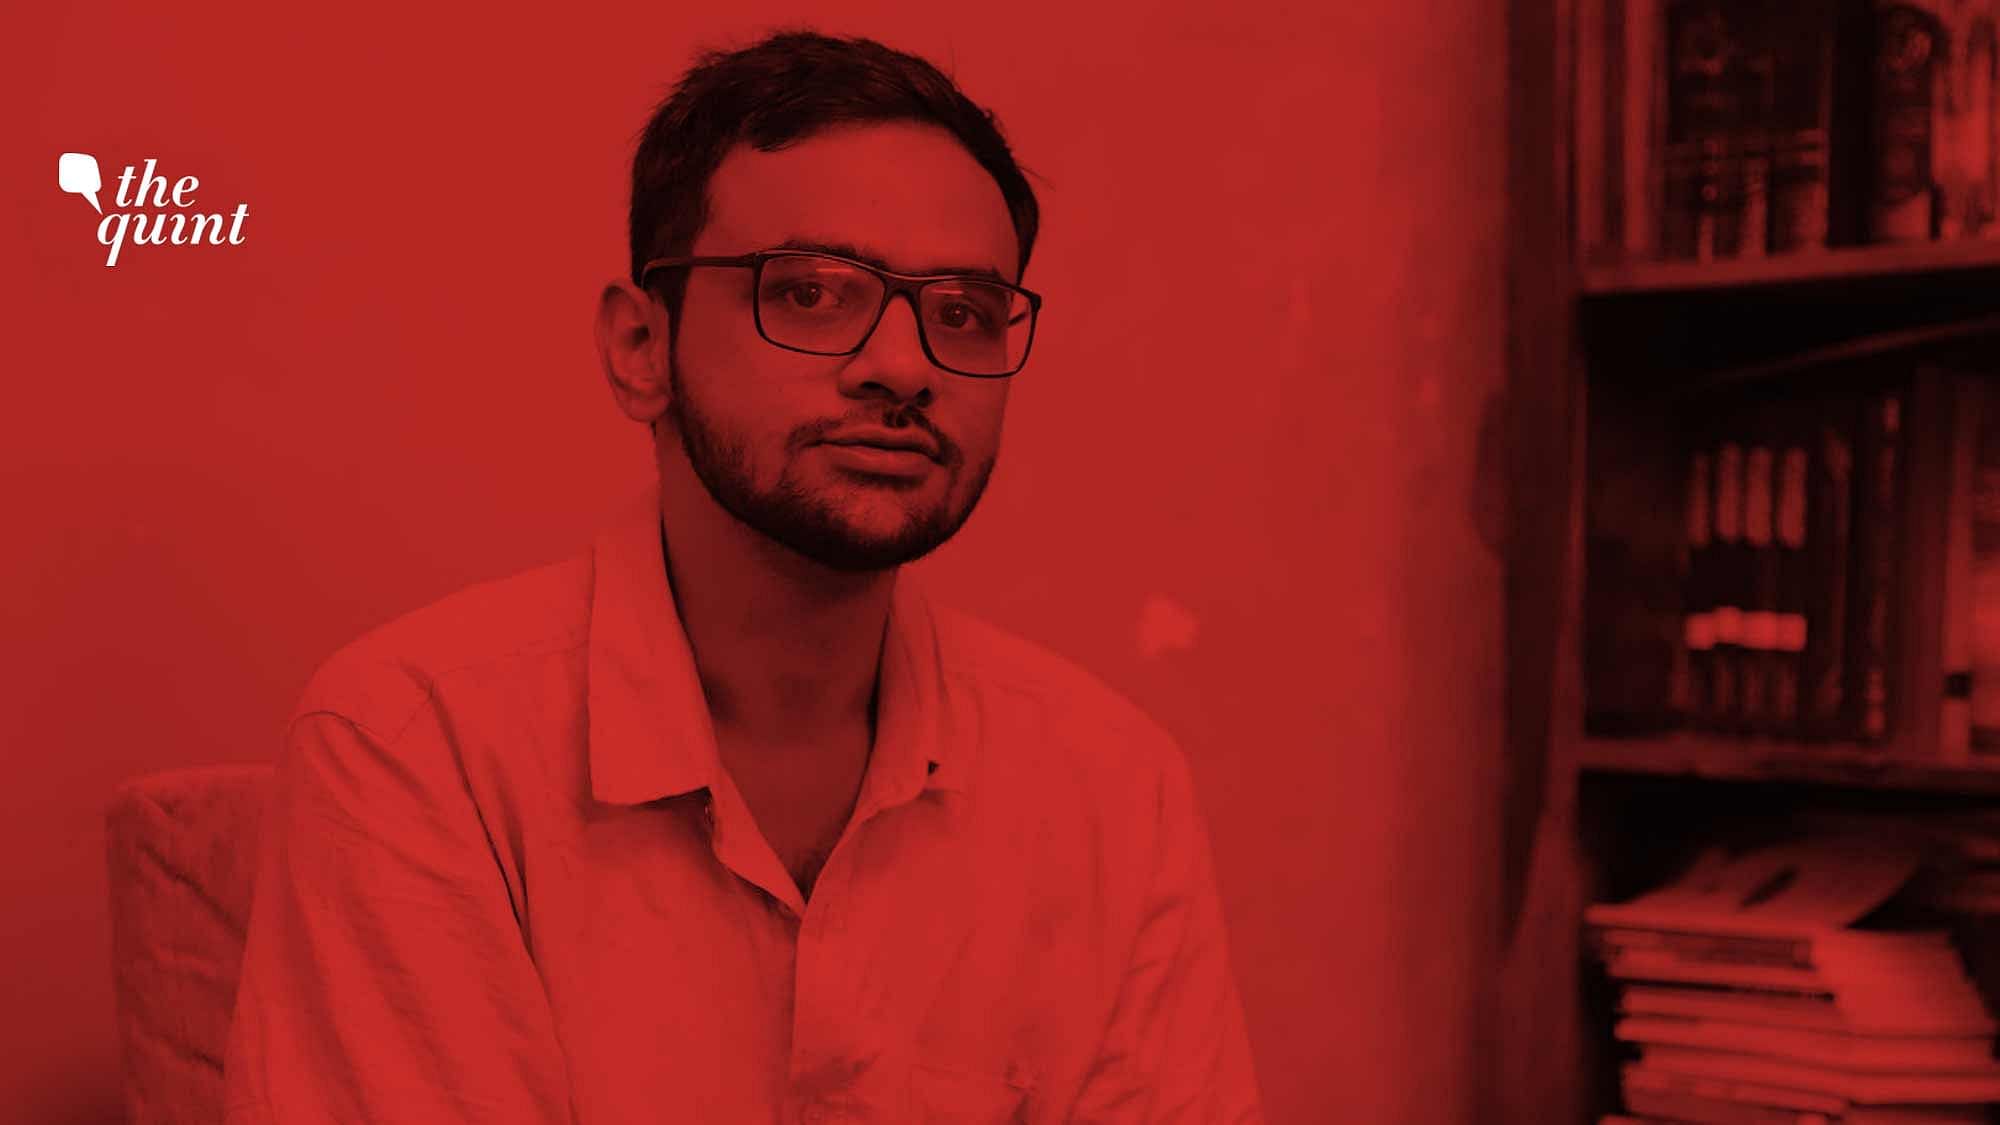 <div class="paragraphs"><p>Activist <a href="https://www.thequint.com/topic/umar-khalid">Umar Khalid</a> on Wednesday, 14 February, withdrew his bail application before the Supreme Court in connection with the 2020 Delhi riots case. His <a href="https://www.thequint.com/photos/umar-khalid-bail-hearing-supreme-court-adjourned-timeline-delhi-riots-case-news#3">bail plea was adjourned</a> 14 times.</p></div>